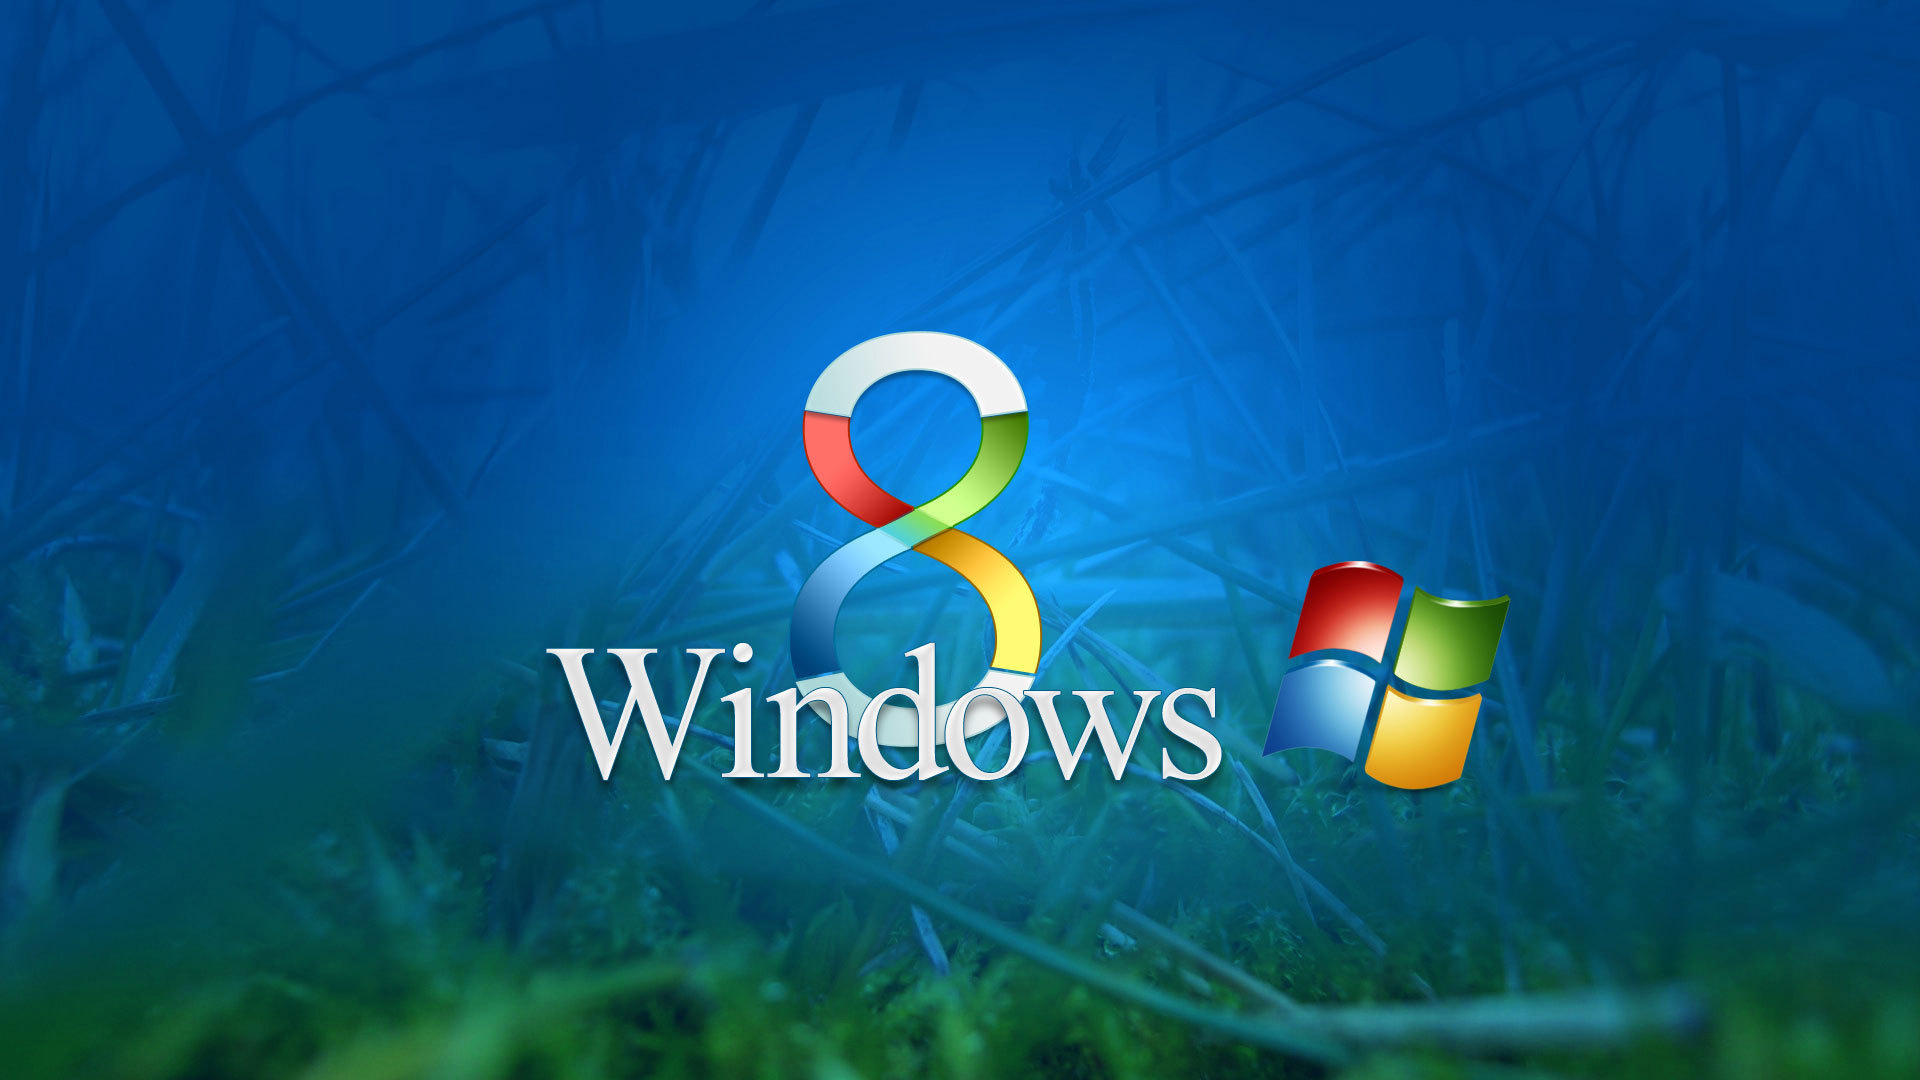 Windows 8 Backgrounds   High resolution wallpapers for your PC